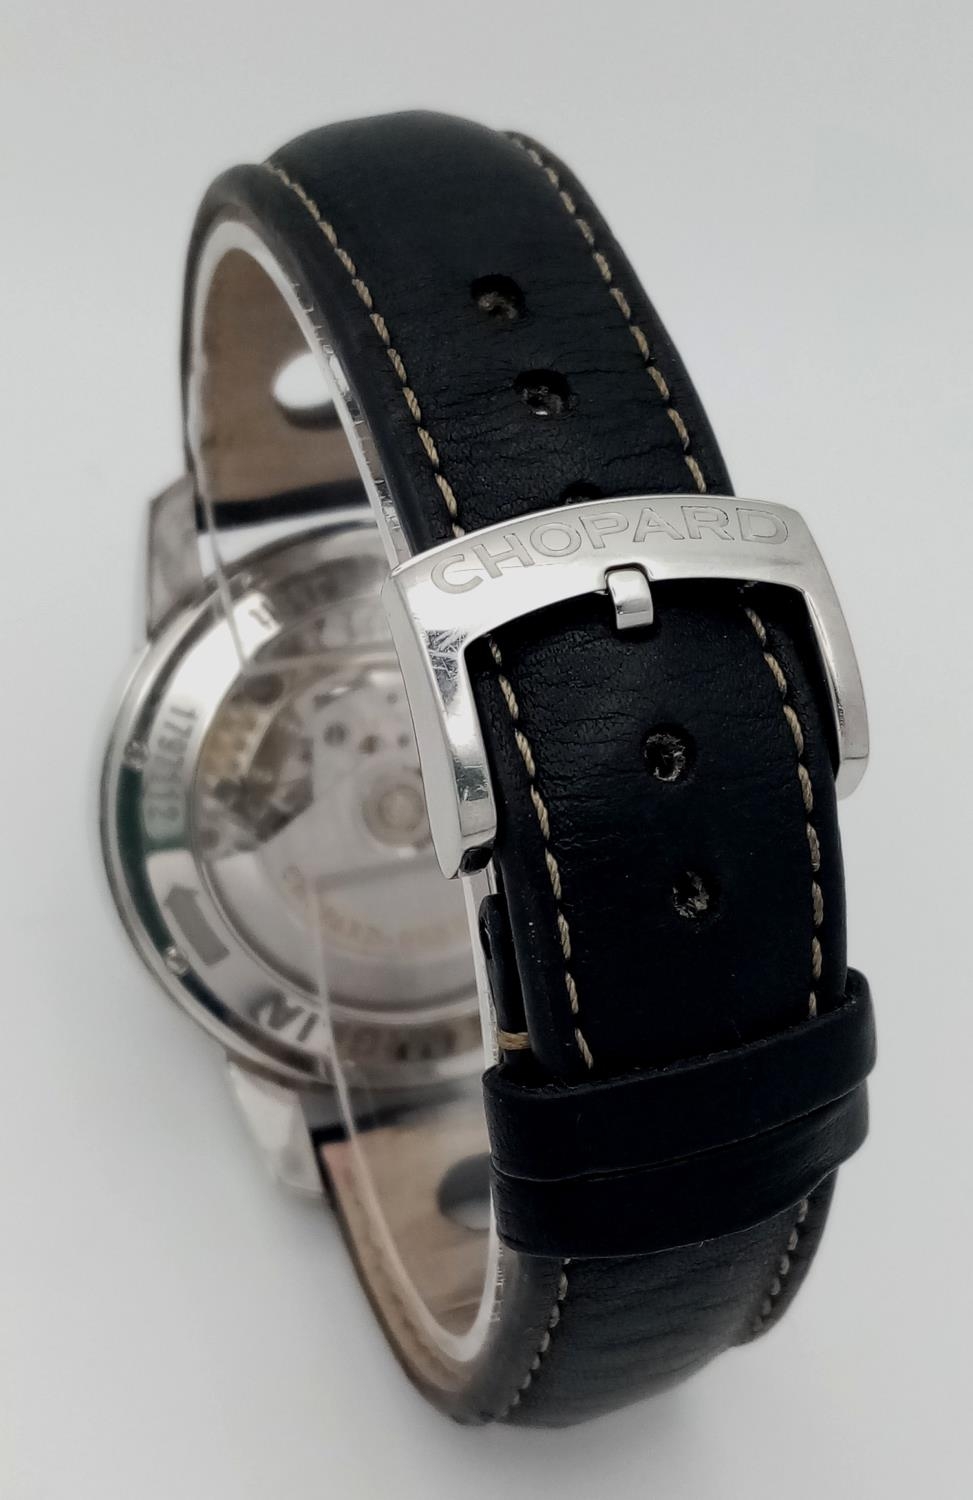 A Chopard Mille Miglia Automatic Gents Watch. Black leather strap. Stainless steel case - 42mm. - Image 7 of 10